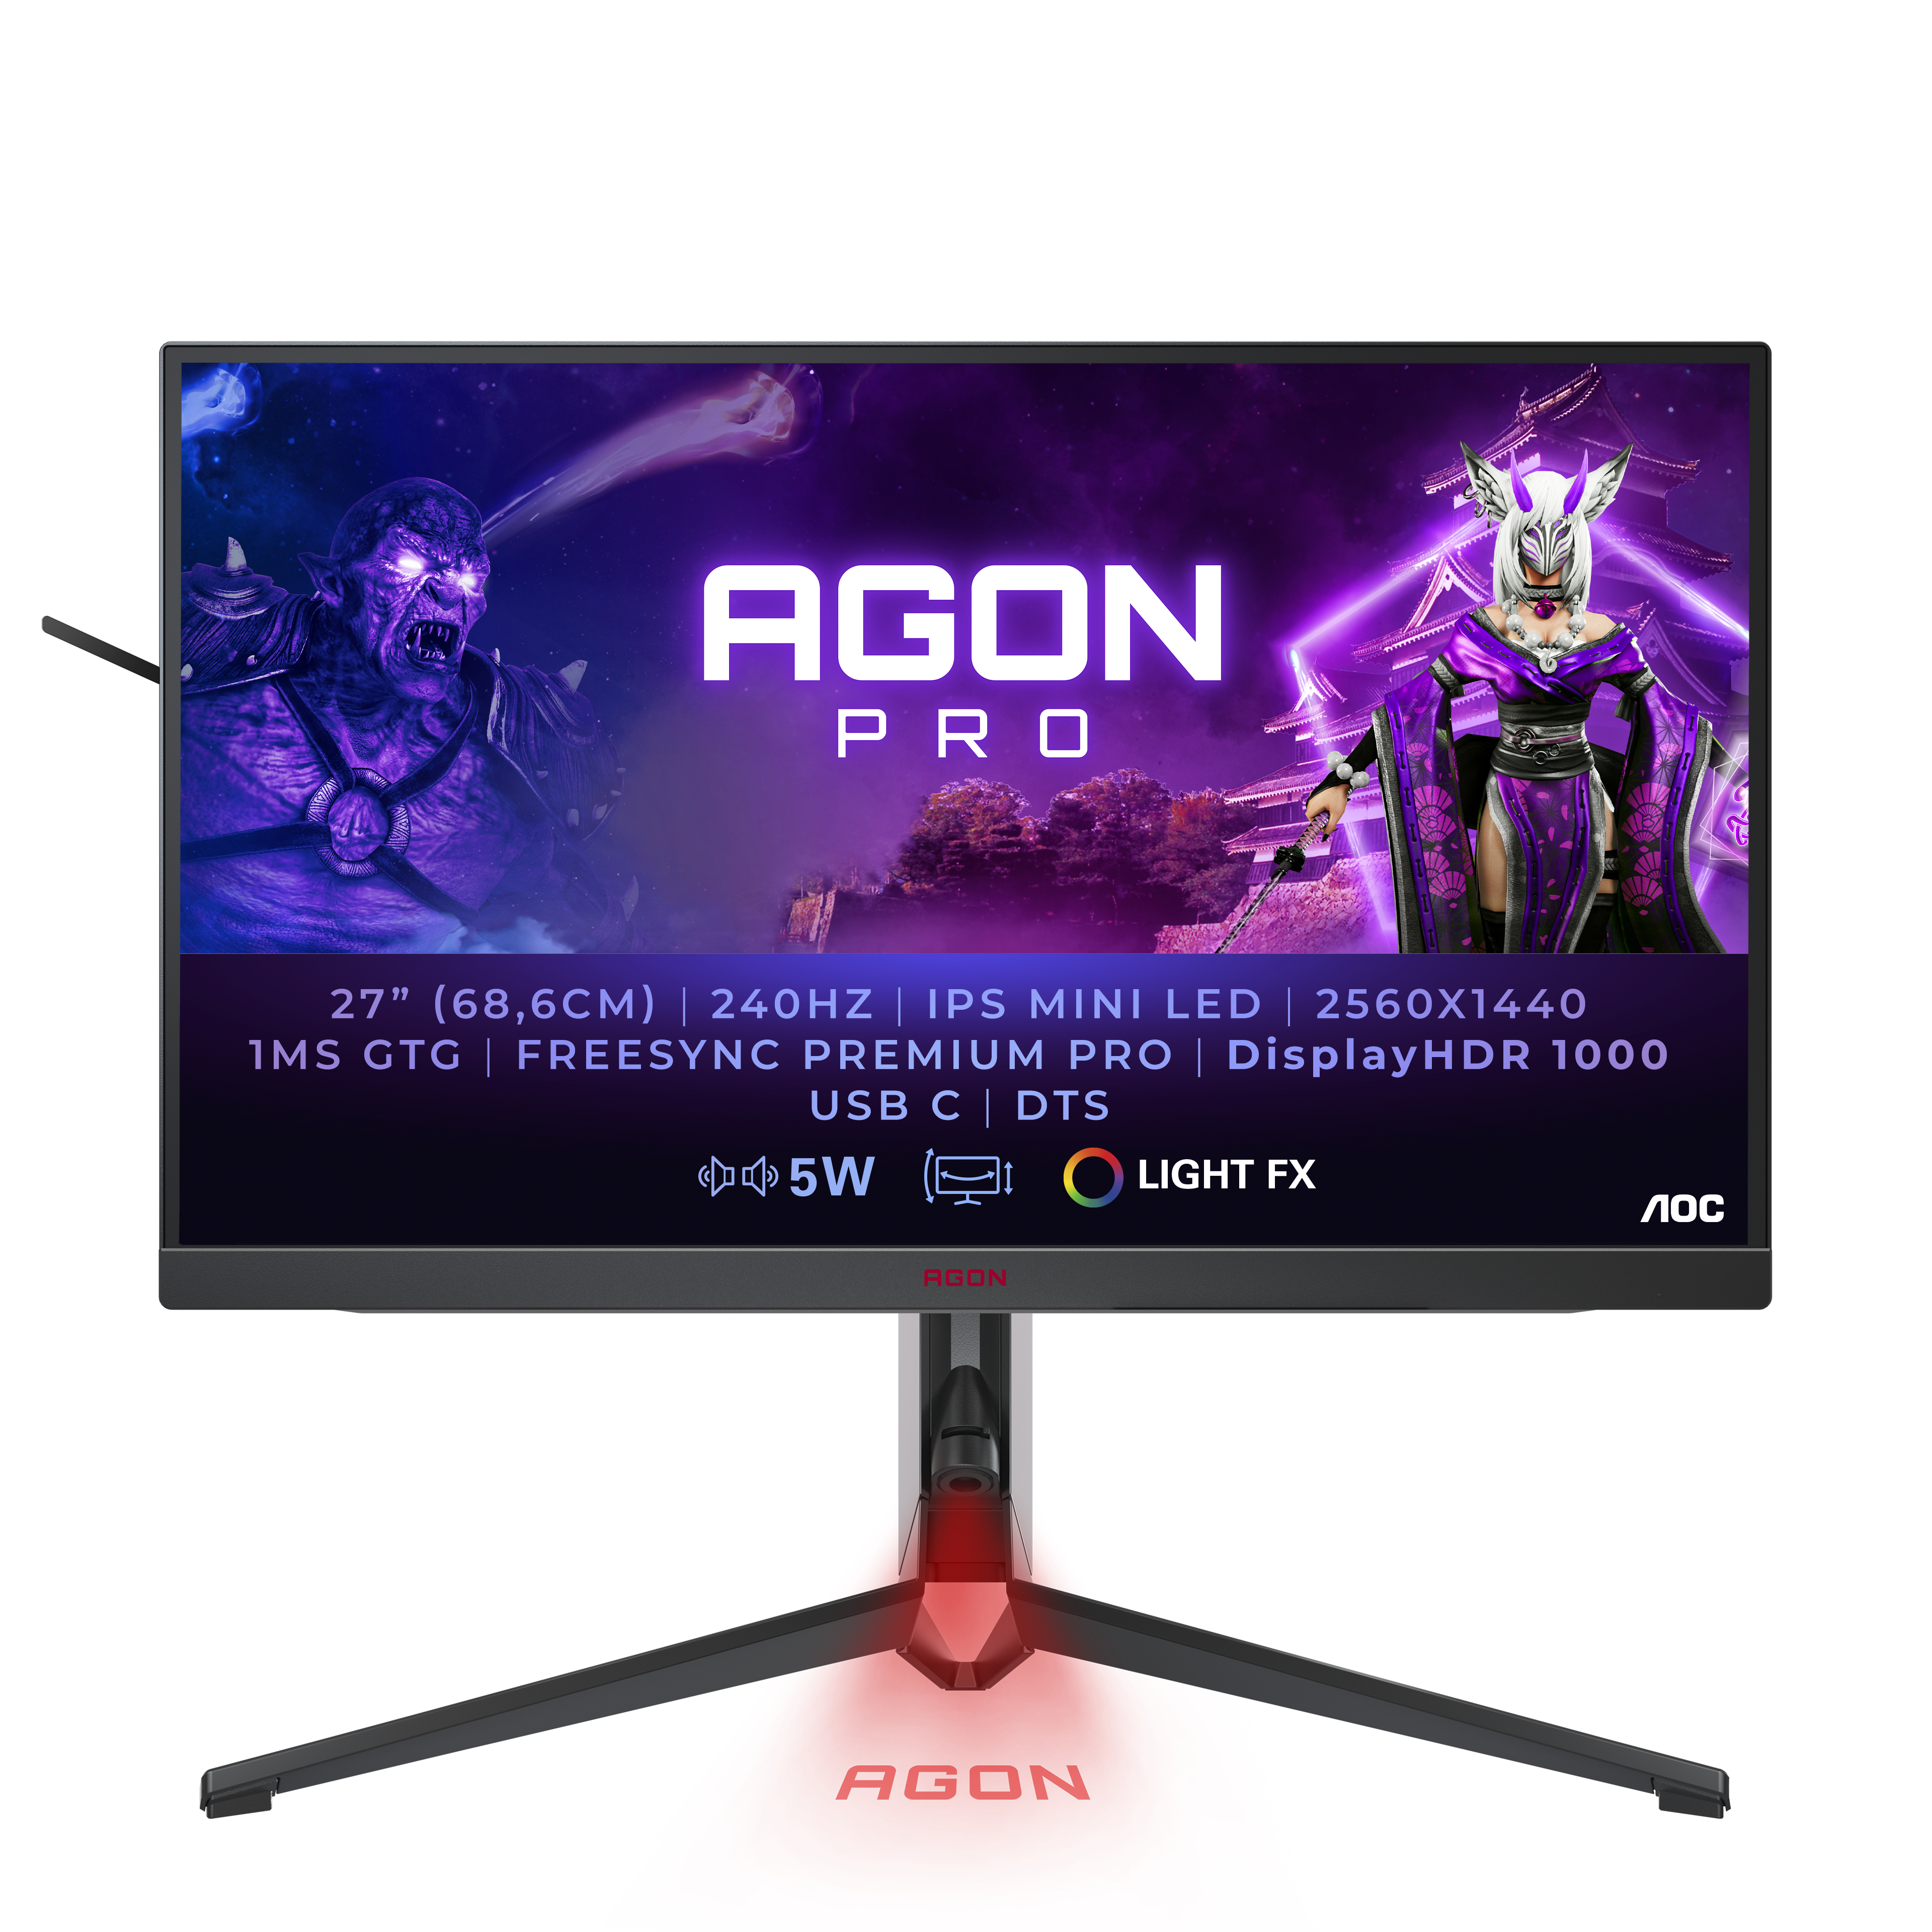 AOC Screen size (inch) 27, Panel resolution 2560x1440, Refresh rate 240 Hz,  Panel type IPS, USB-C connectivity USB-C 3.2 x 1 (DP alt mode, upstream,  power delivery up to 65 W), HDMI